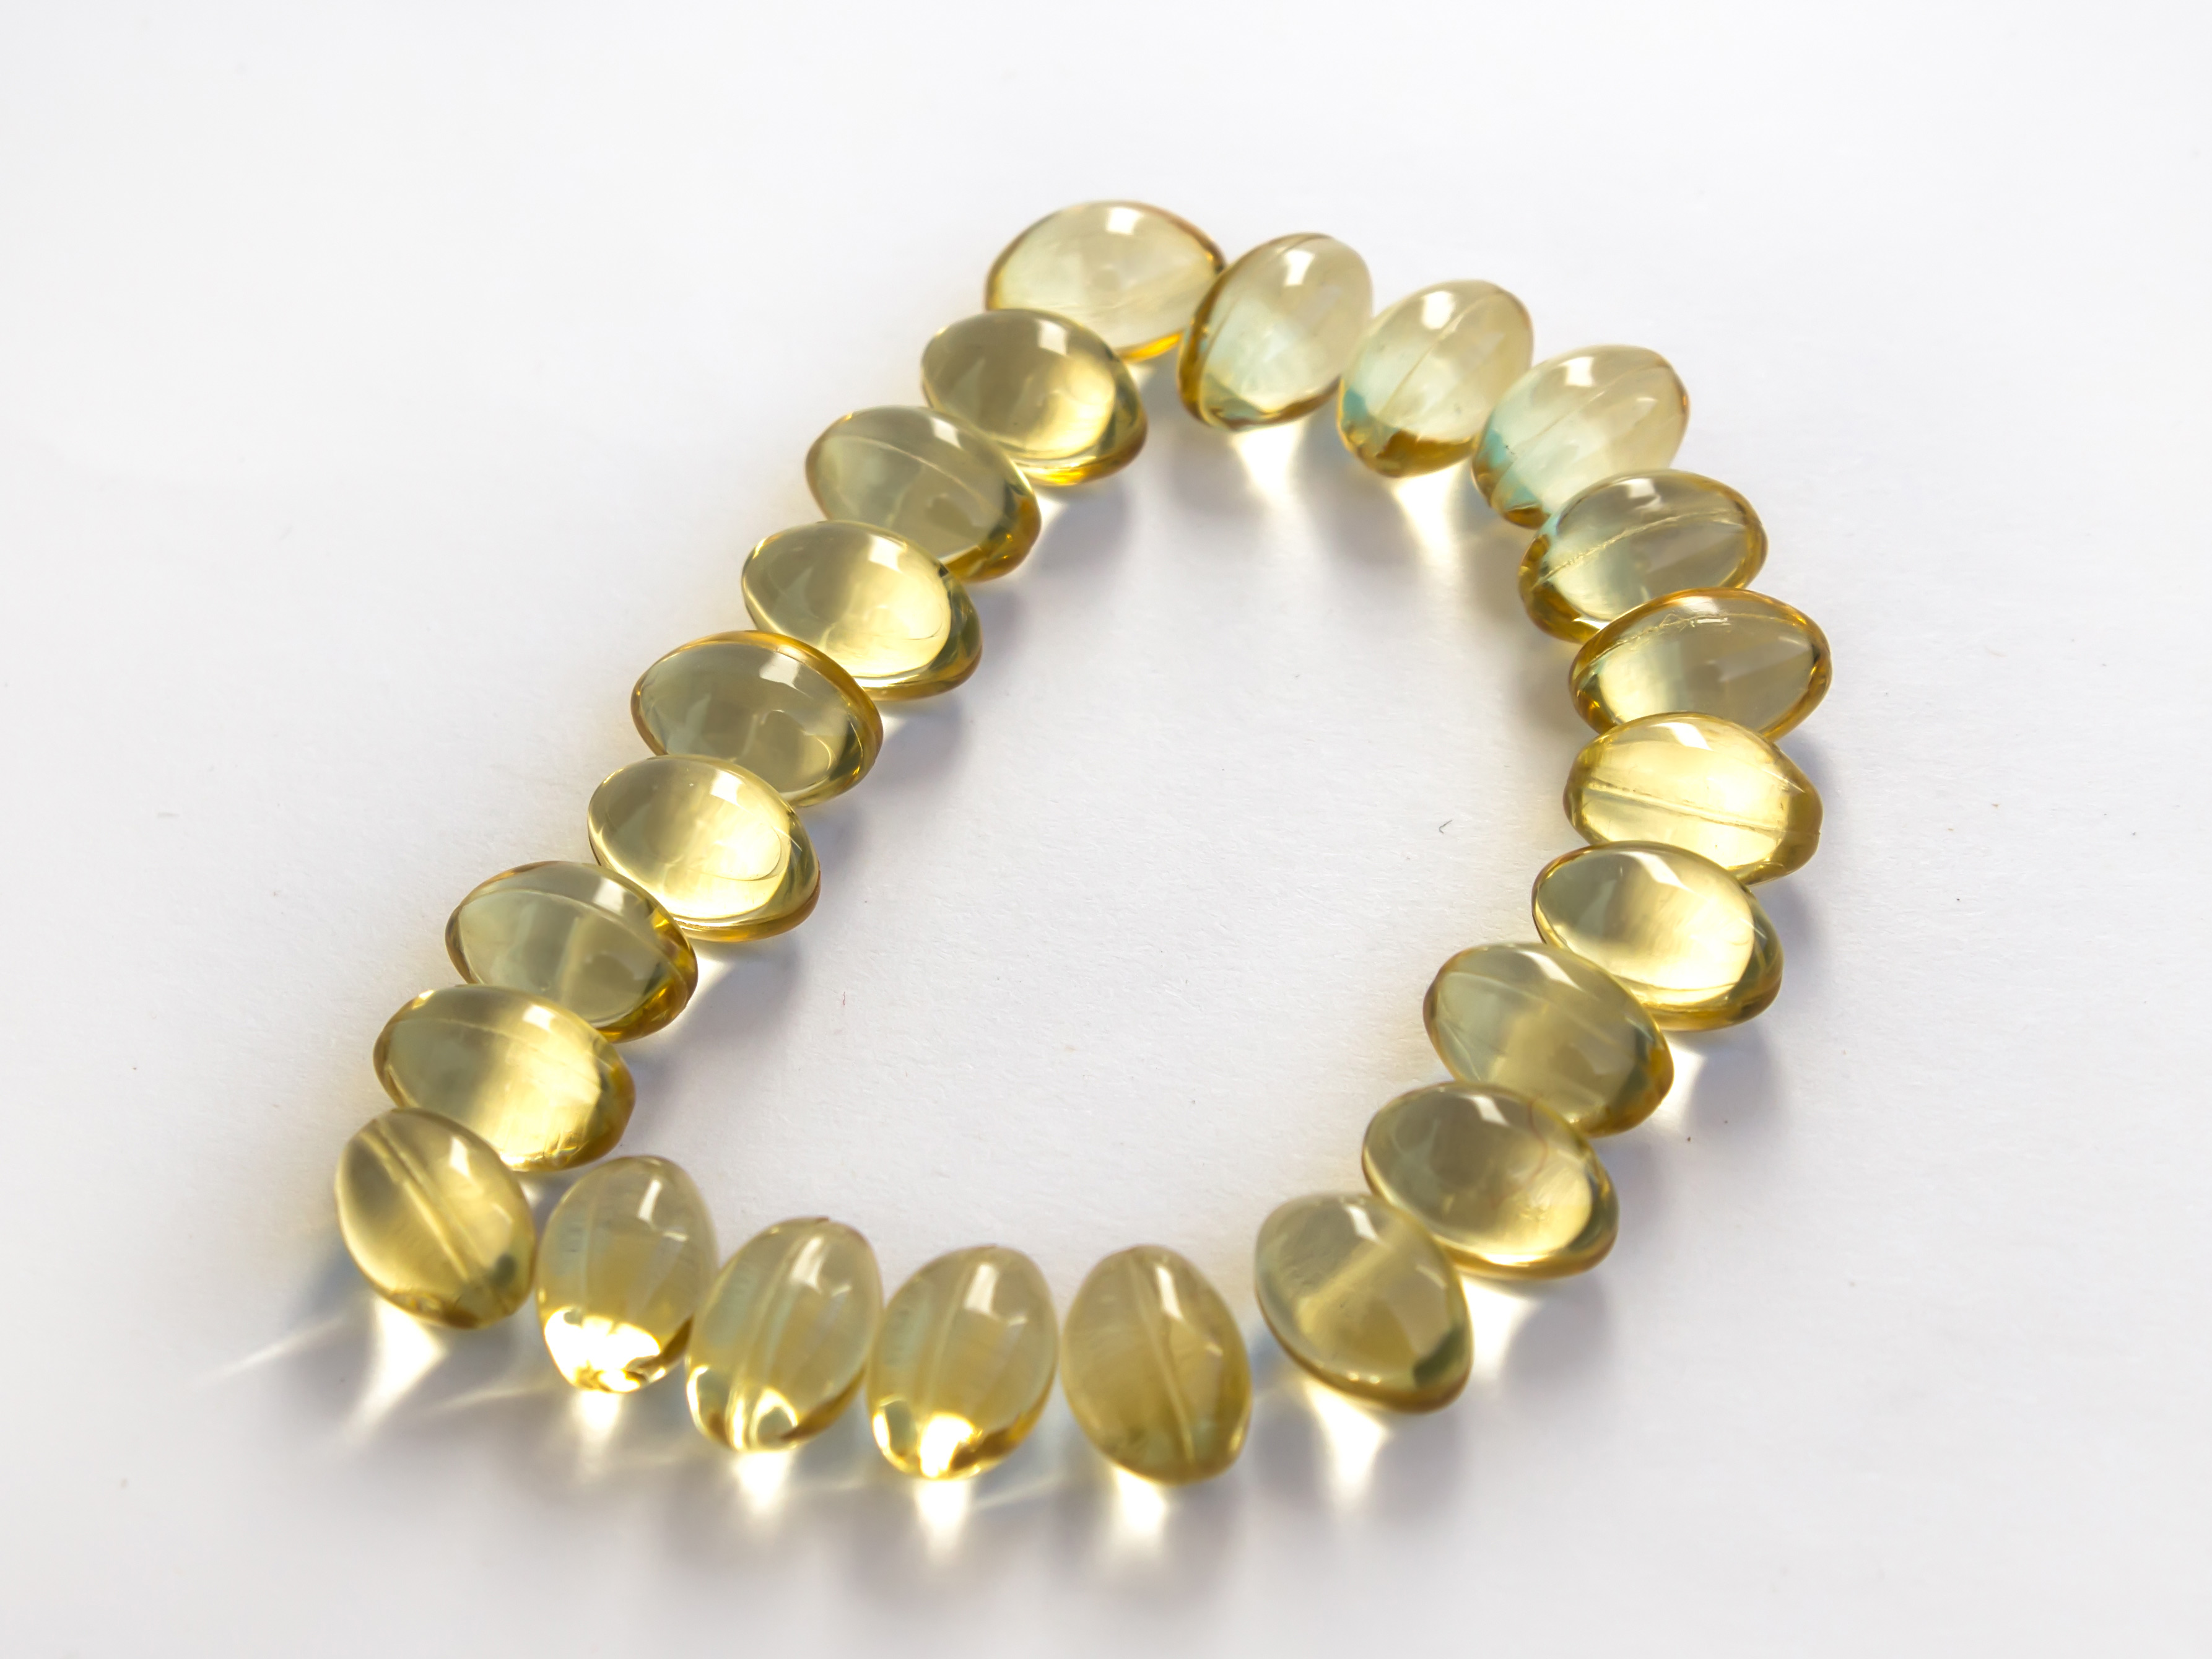 Is cancer a vitamin D deficiency?